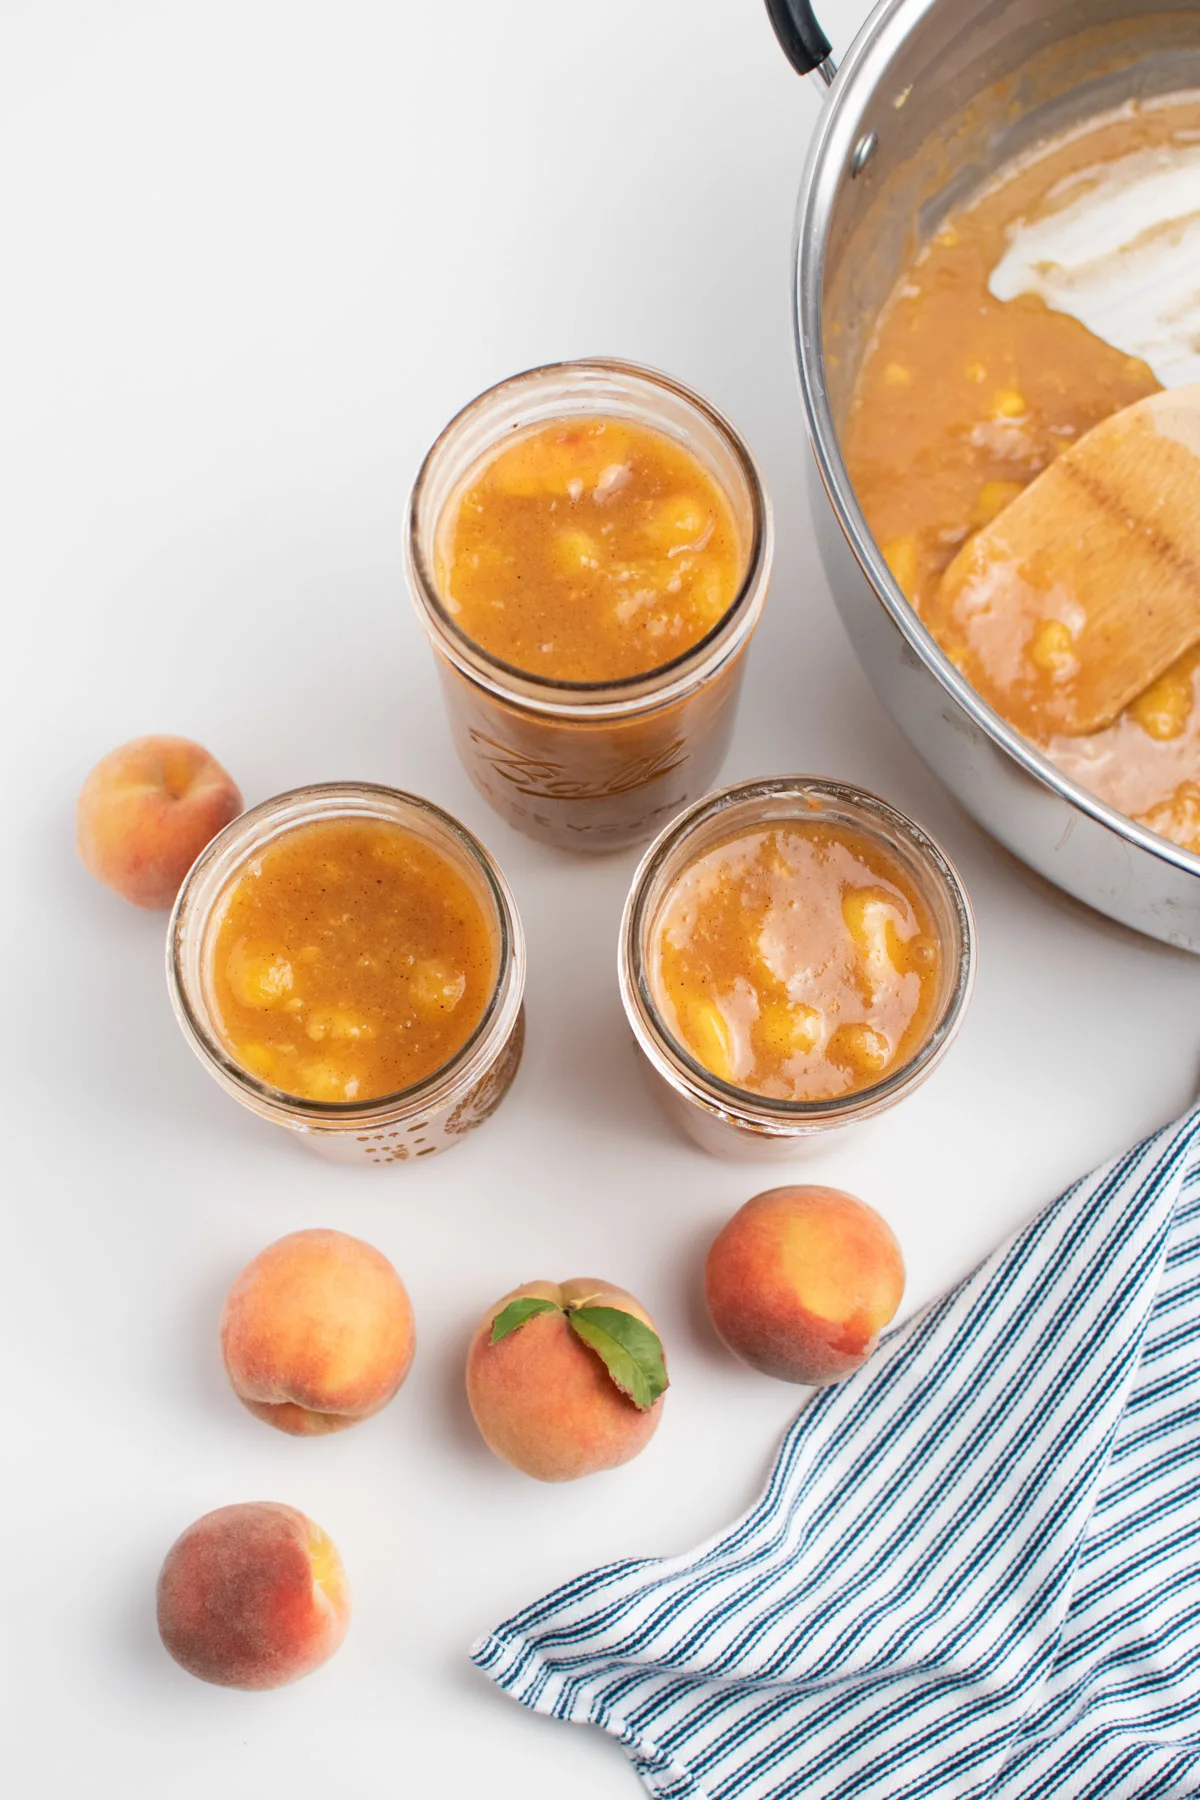 Three jars of peach pie filling surrounded by fresh peaches and striped towel.